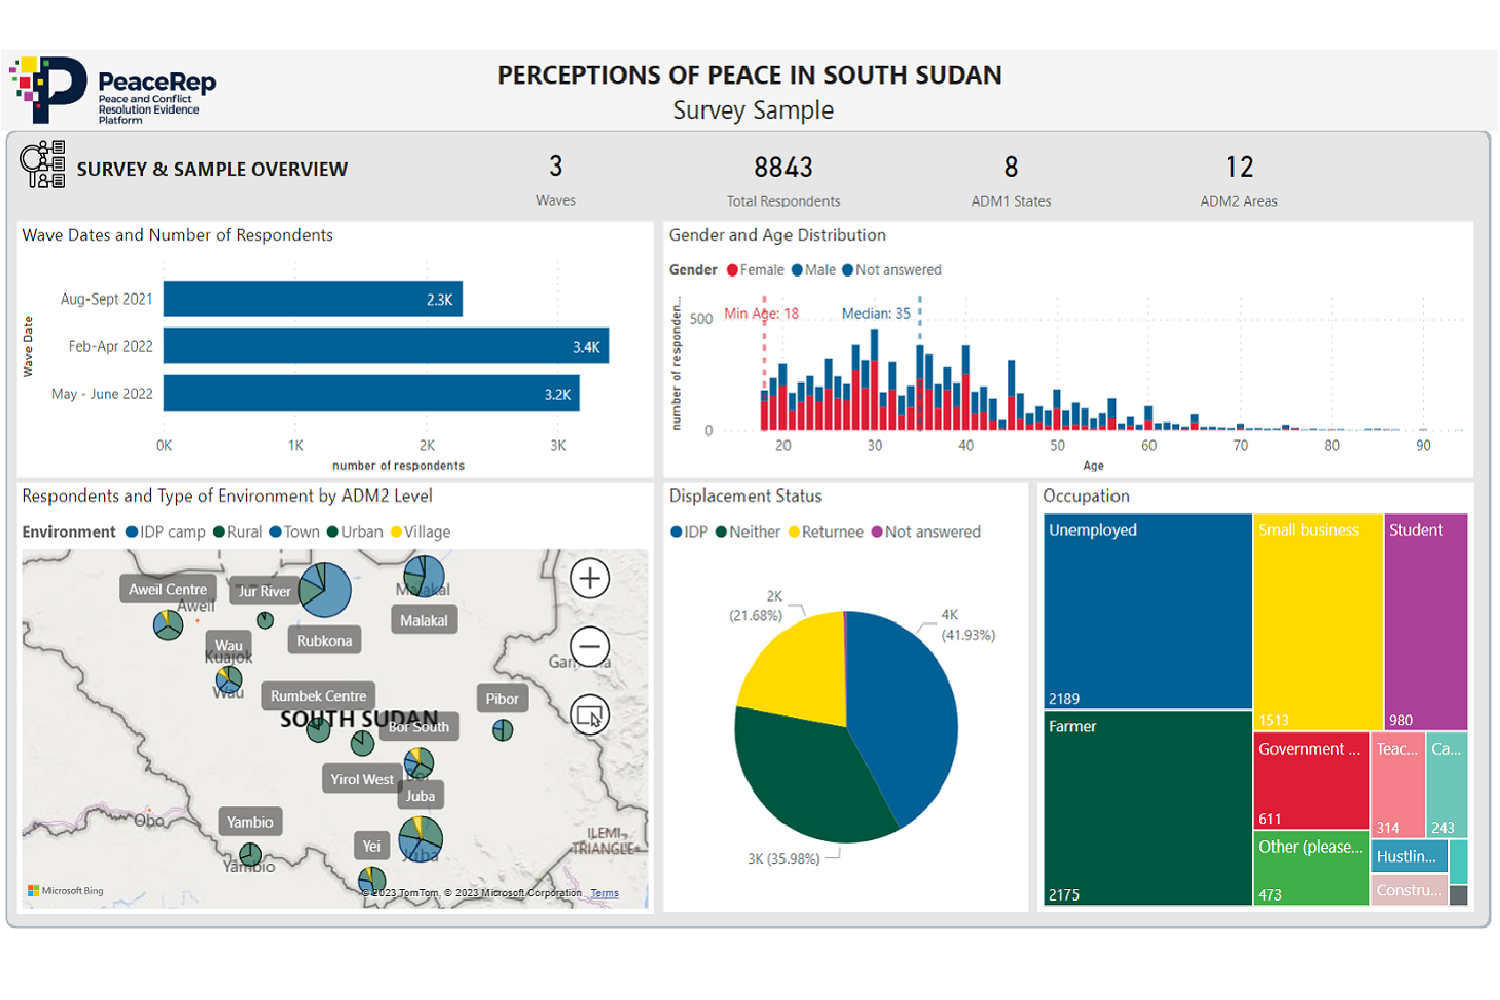 New digital tool highlights perceptions of peace in South Sudan